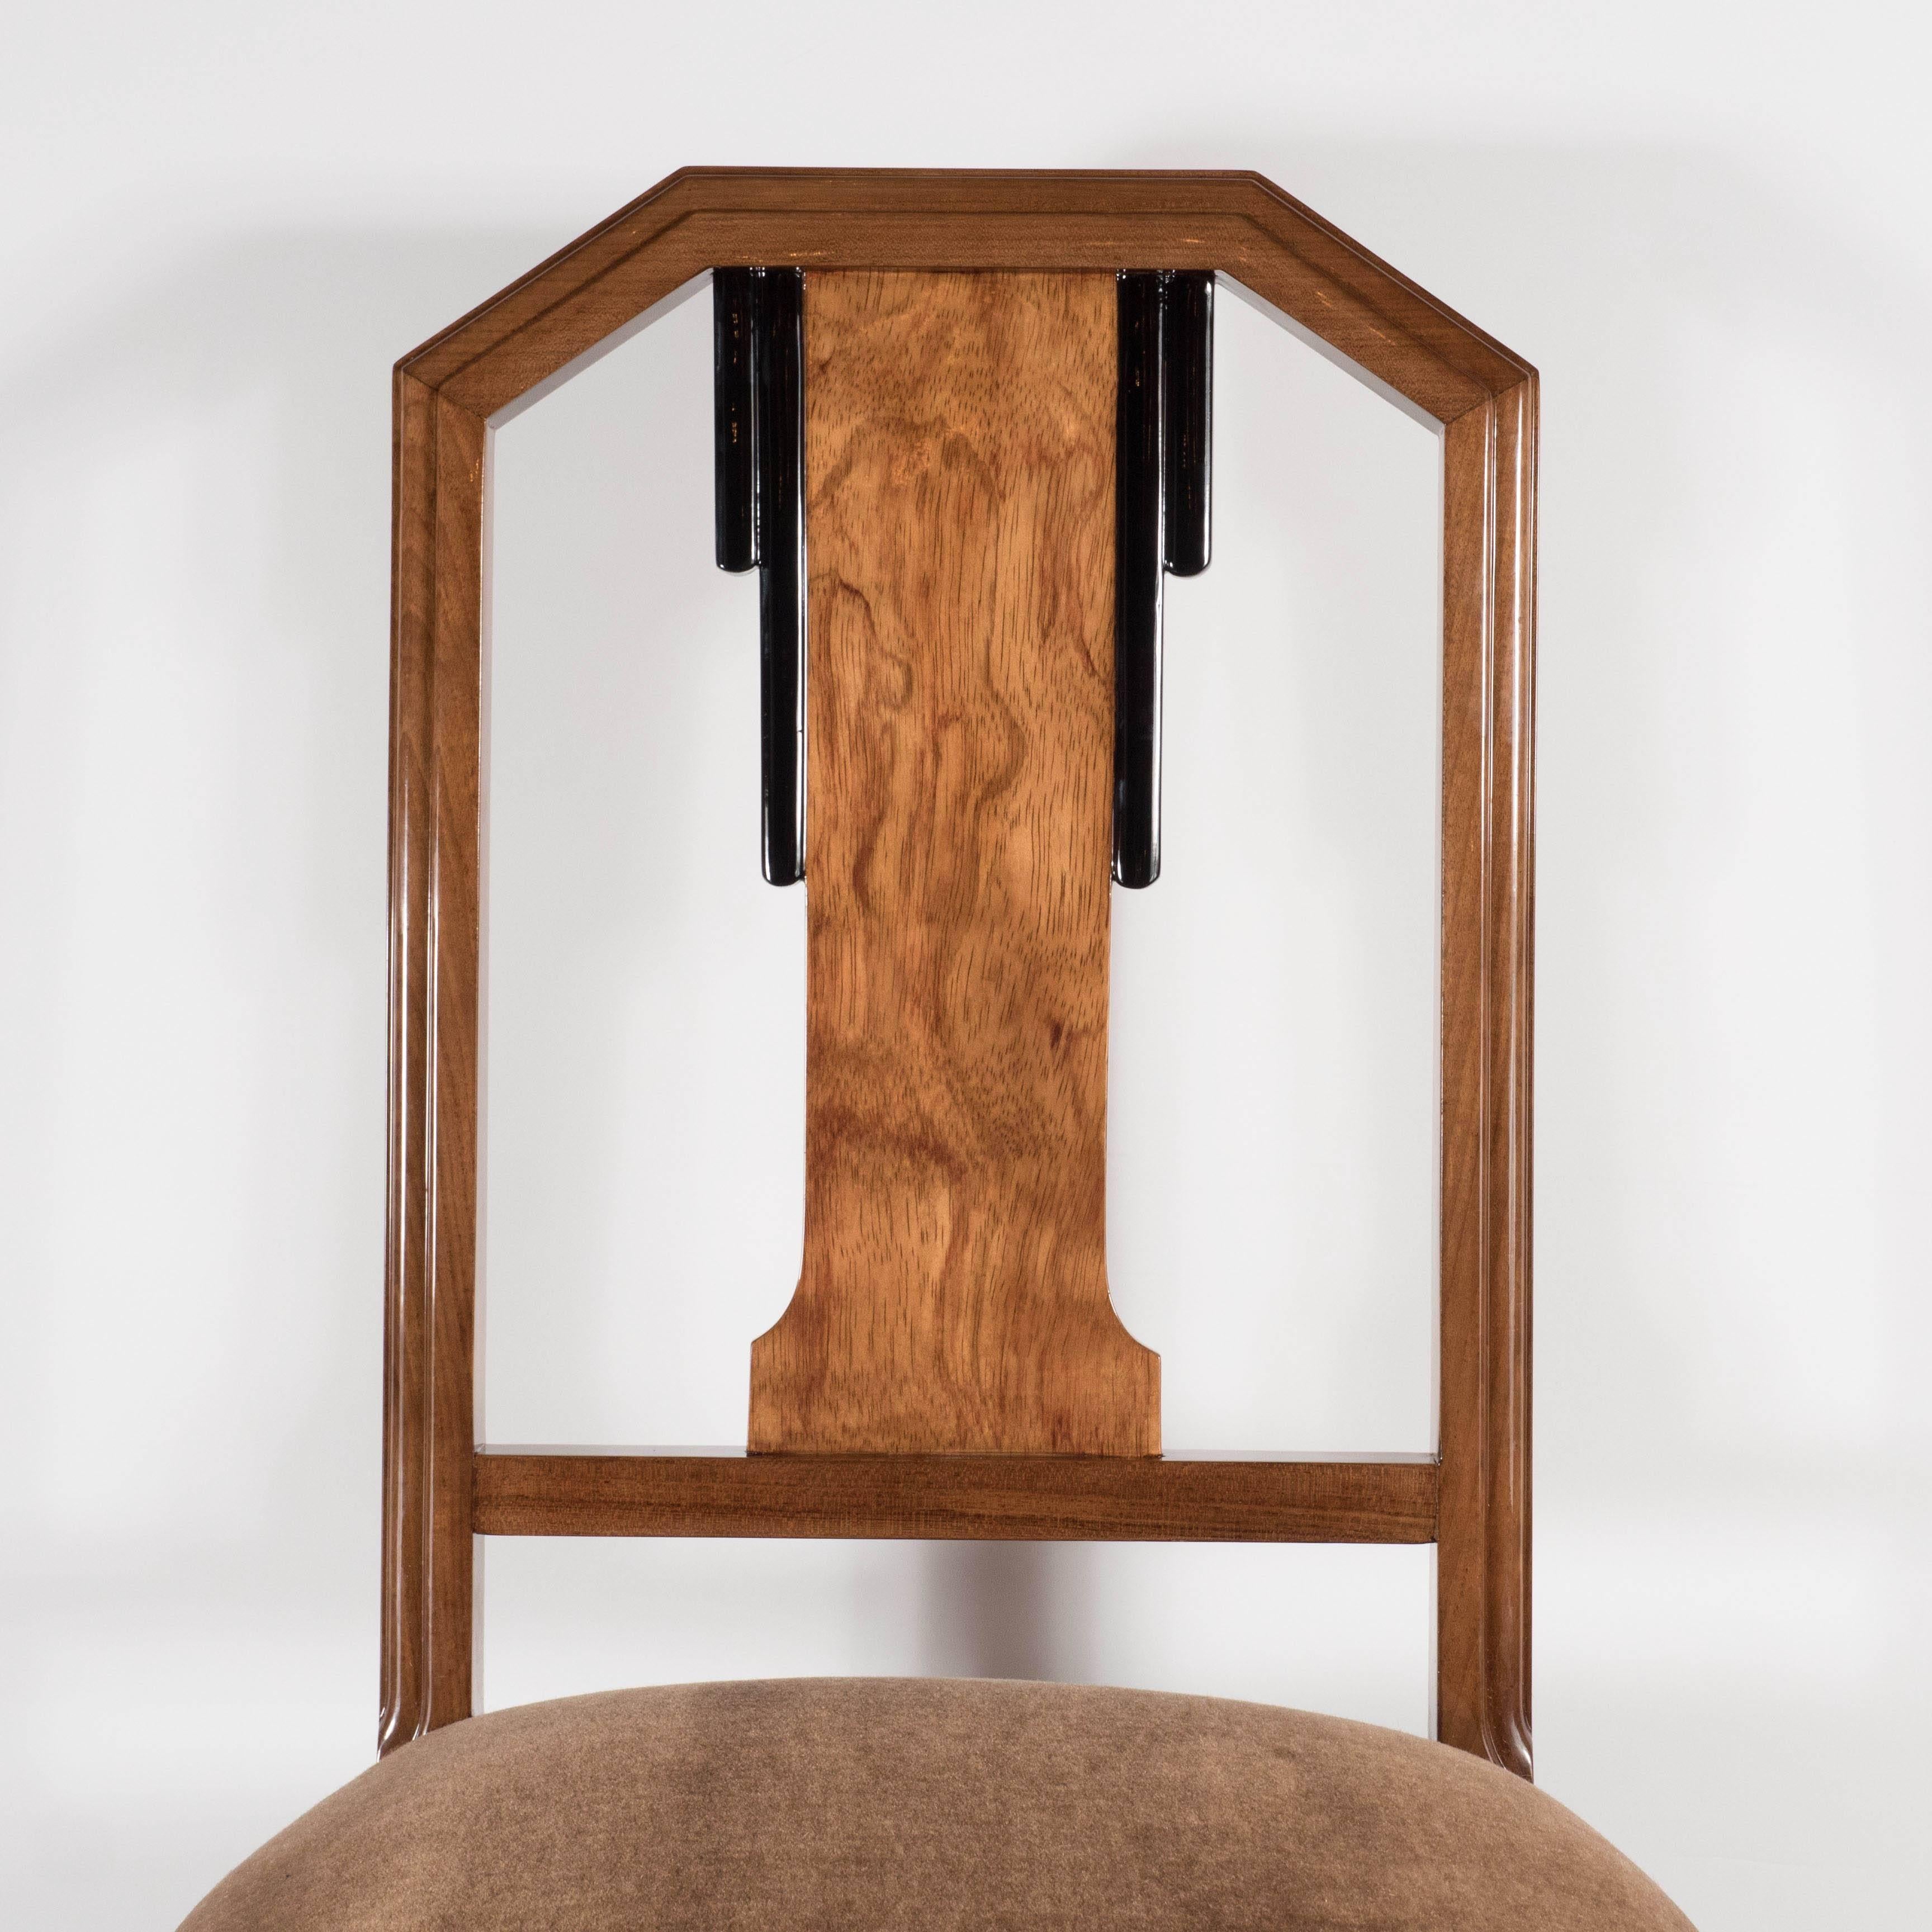 This gorgeous Art Deco skyscraper style two-tone desk or occasional chair was realized in the United States, circa 1935. It features a rectilinear skyscraper style back with a central panel in burled walnut flanked by a stepped black lacquer design